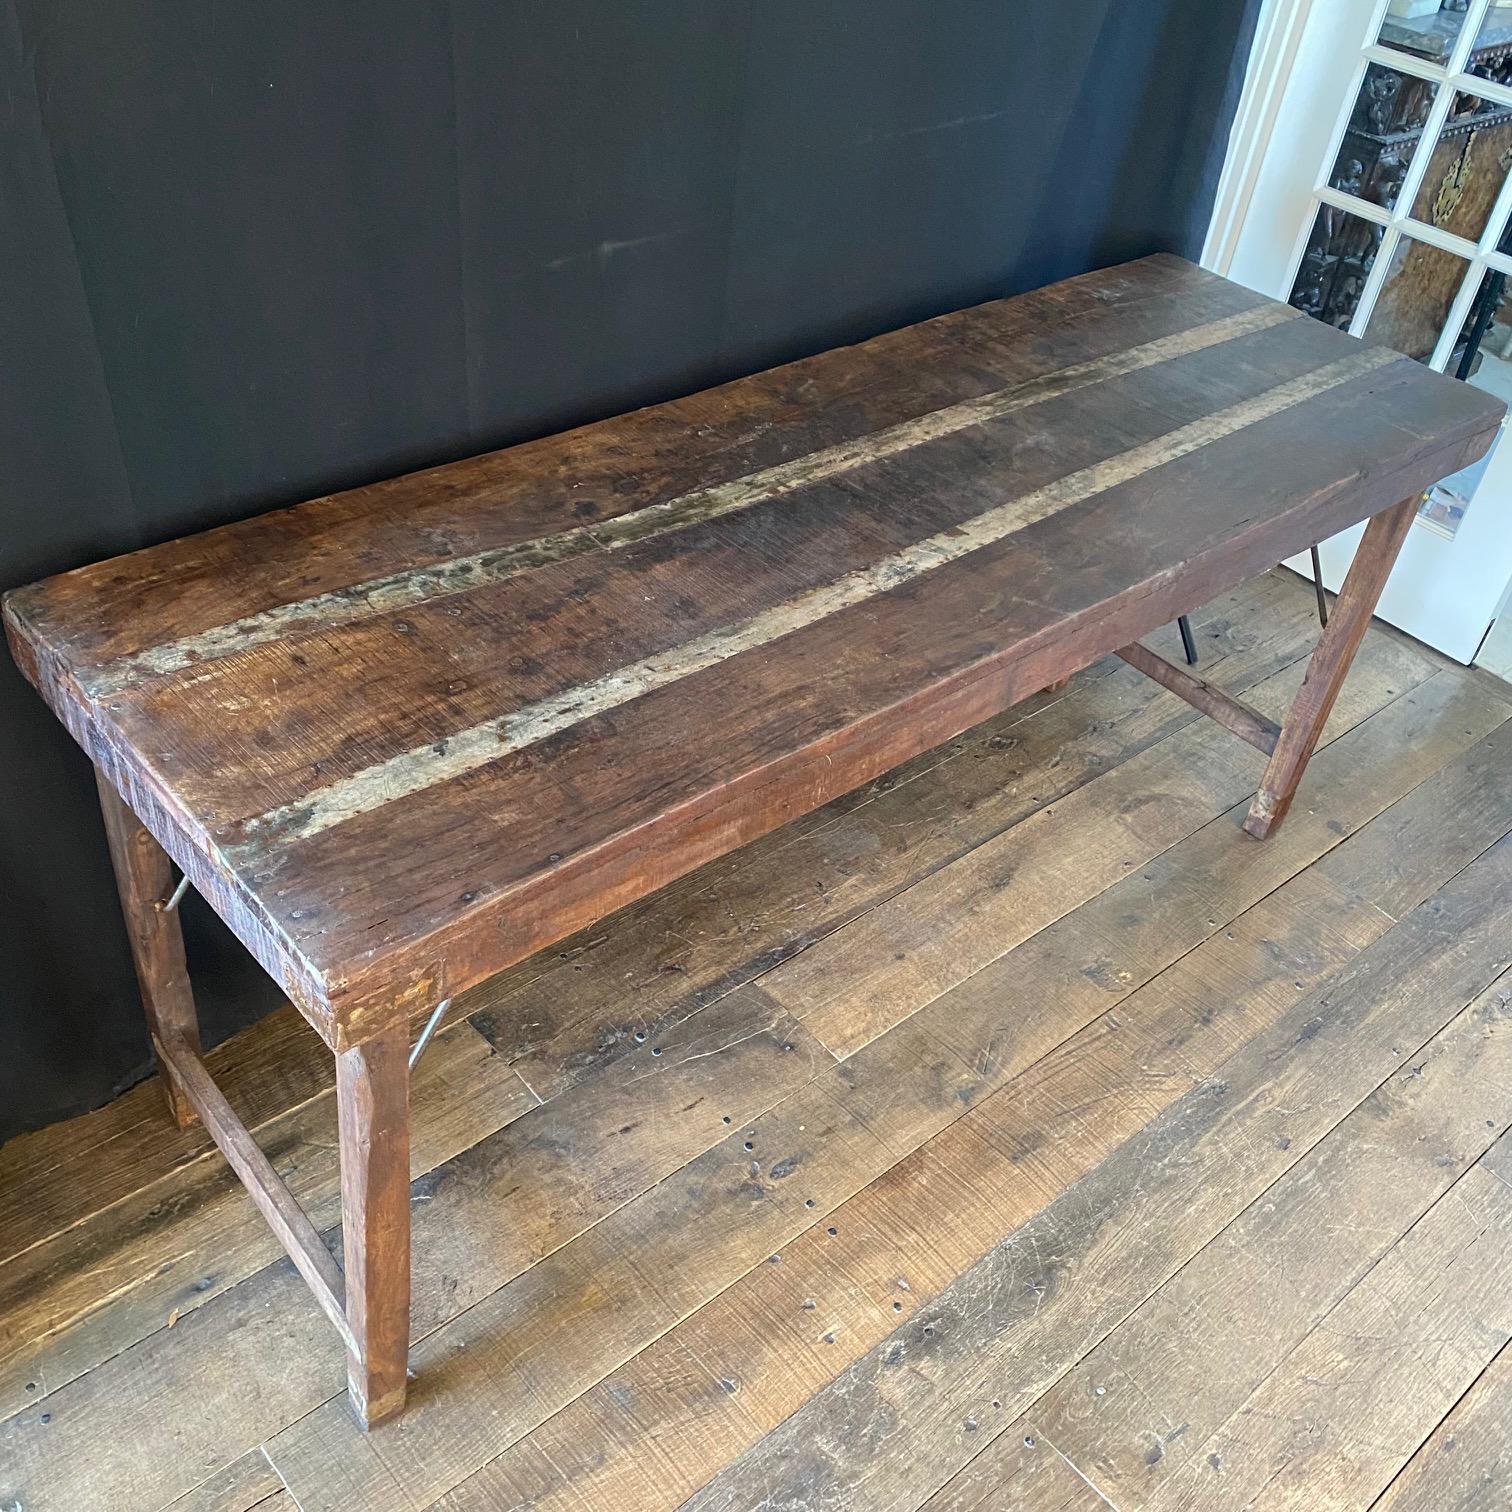 An early rustic folding table, hardwood with iron strapping, used by tradesman possibly for paper hanging. Table folds up making it easy to transport to projects. Use this table for a console table, sofa table, dining table, work table or serving